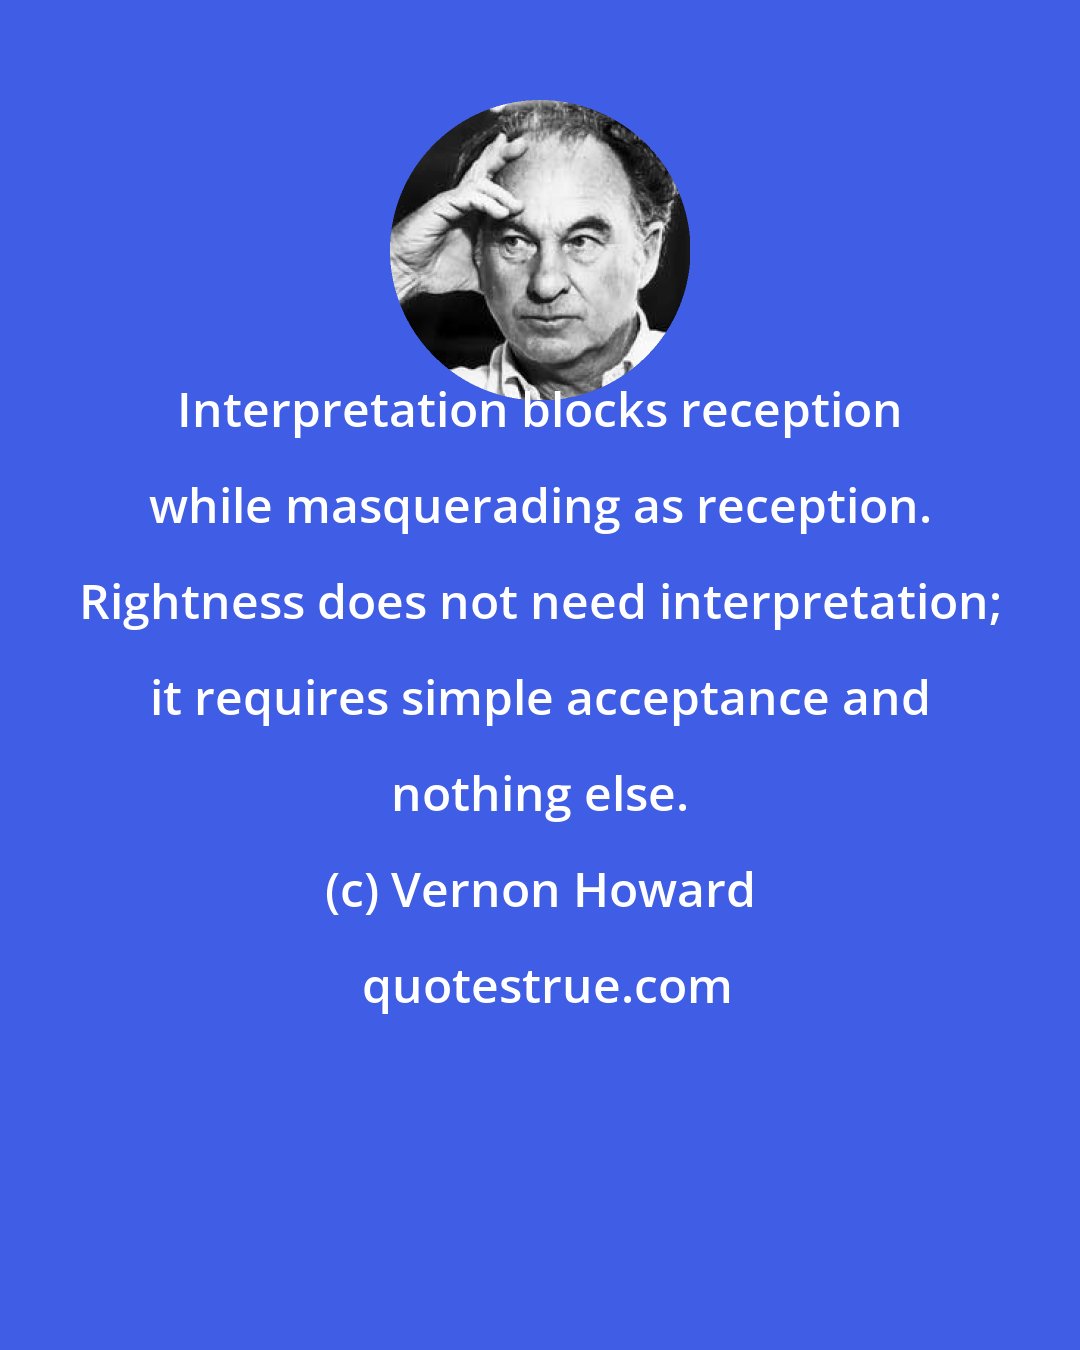 Vernon Howard: Interpretation blocks reception while masquerading as reception. Rightness does not need interpretation; it requires simple acceptance and nothing else.